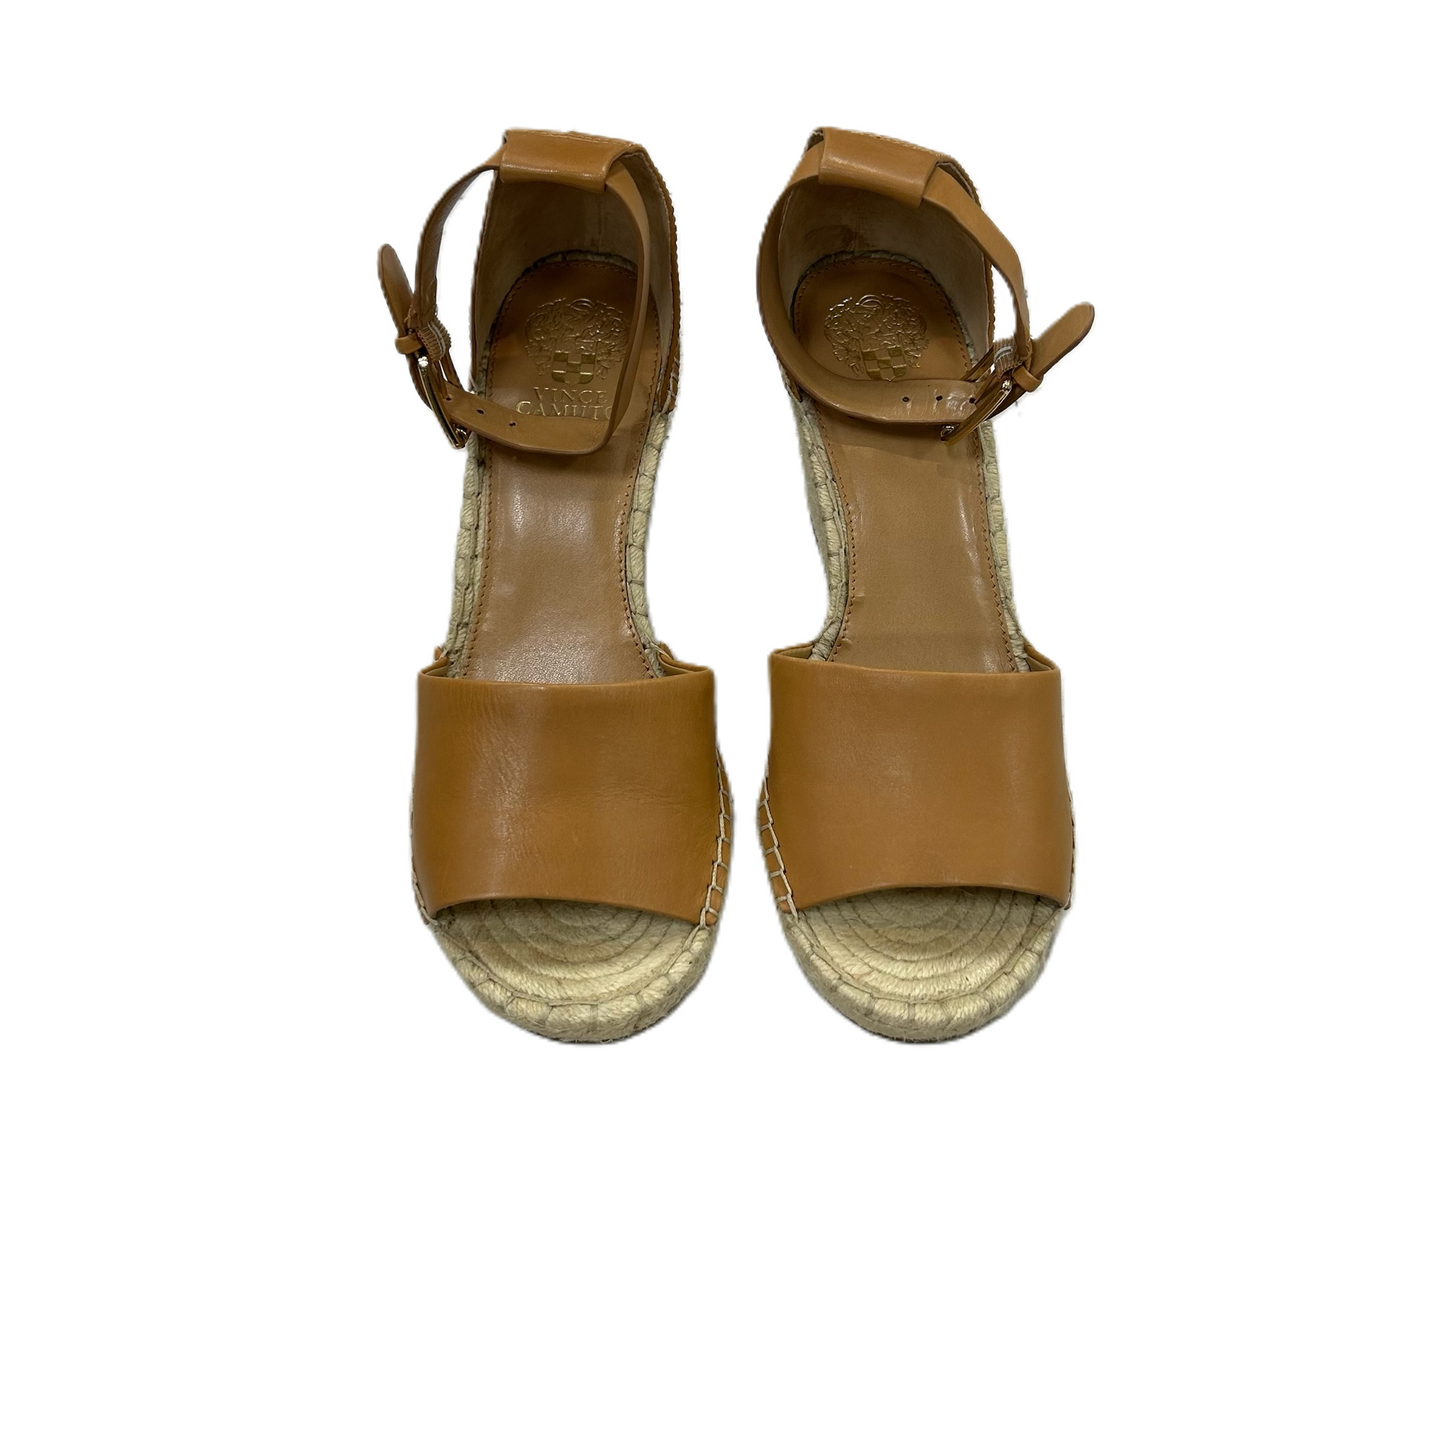 Brown Sandals Heels Wedge By Vince Camuto, Size: 11